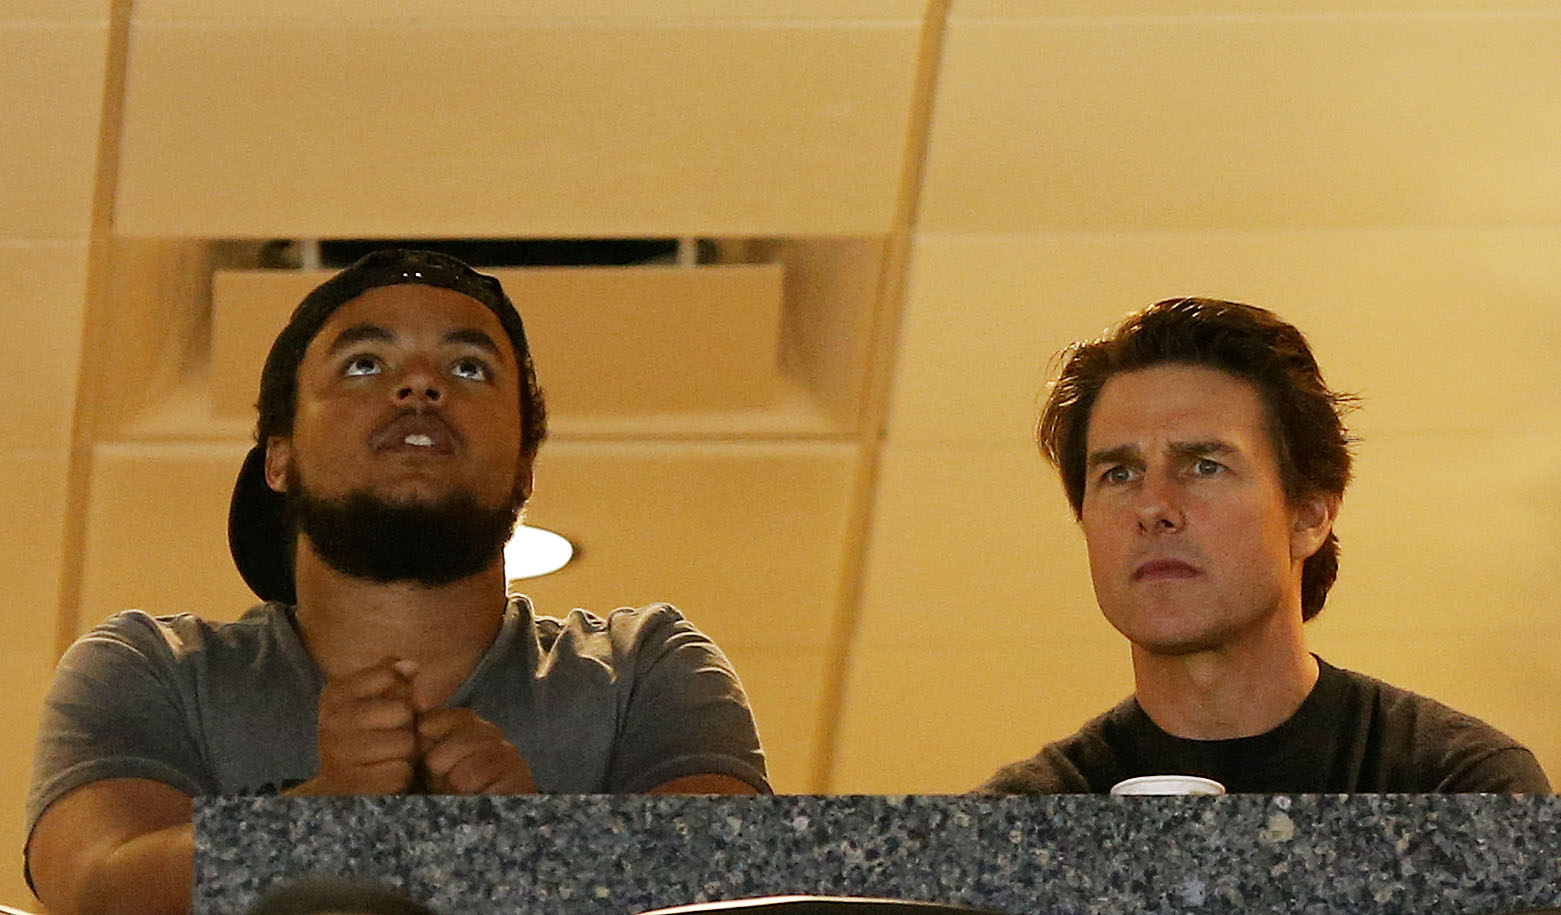 Connor Kidman-Cruise and Tom Cruise watch a game during the NCAA Women's Final Four Semifinal on April 5, 2015, in Tampa, Florida | Source: Getty Images